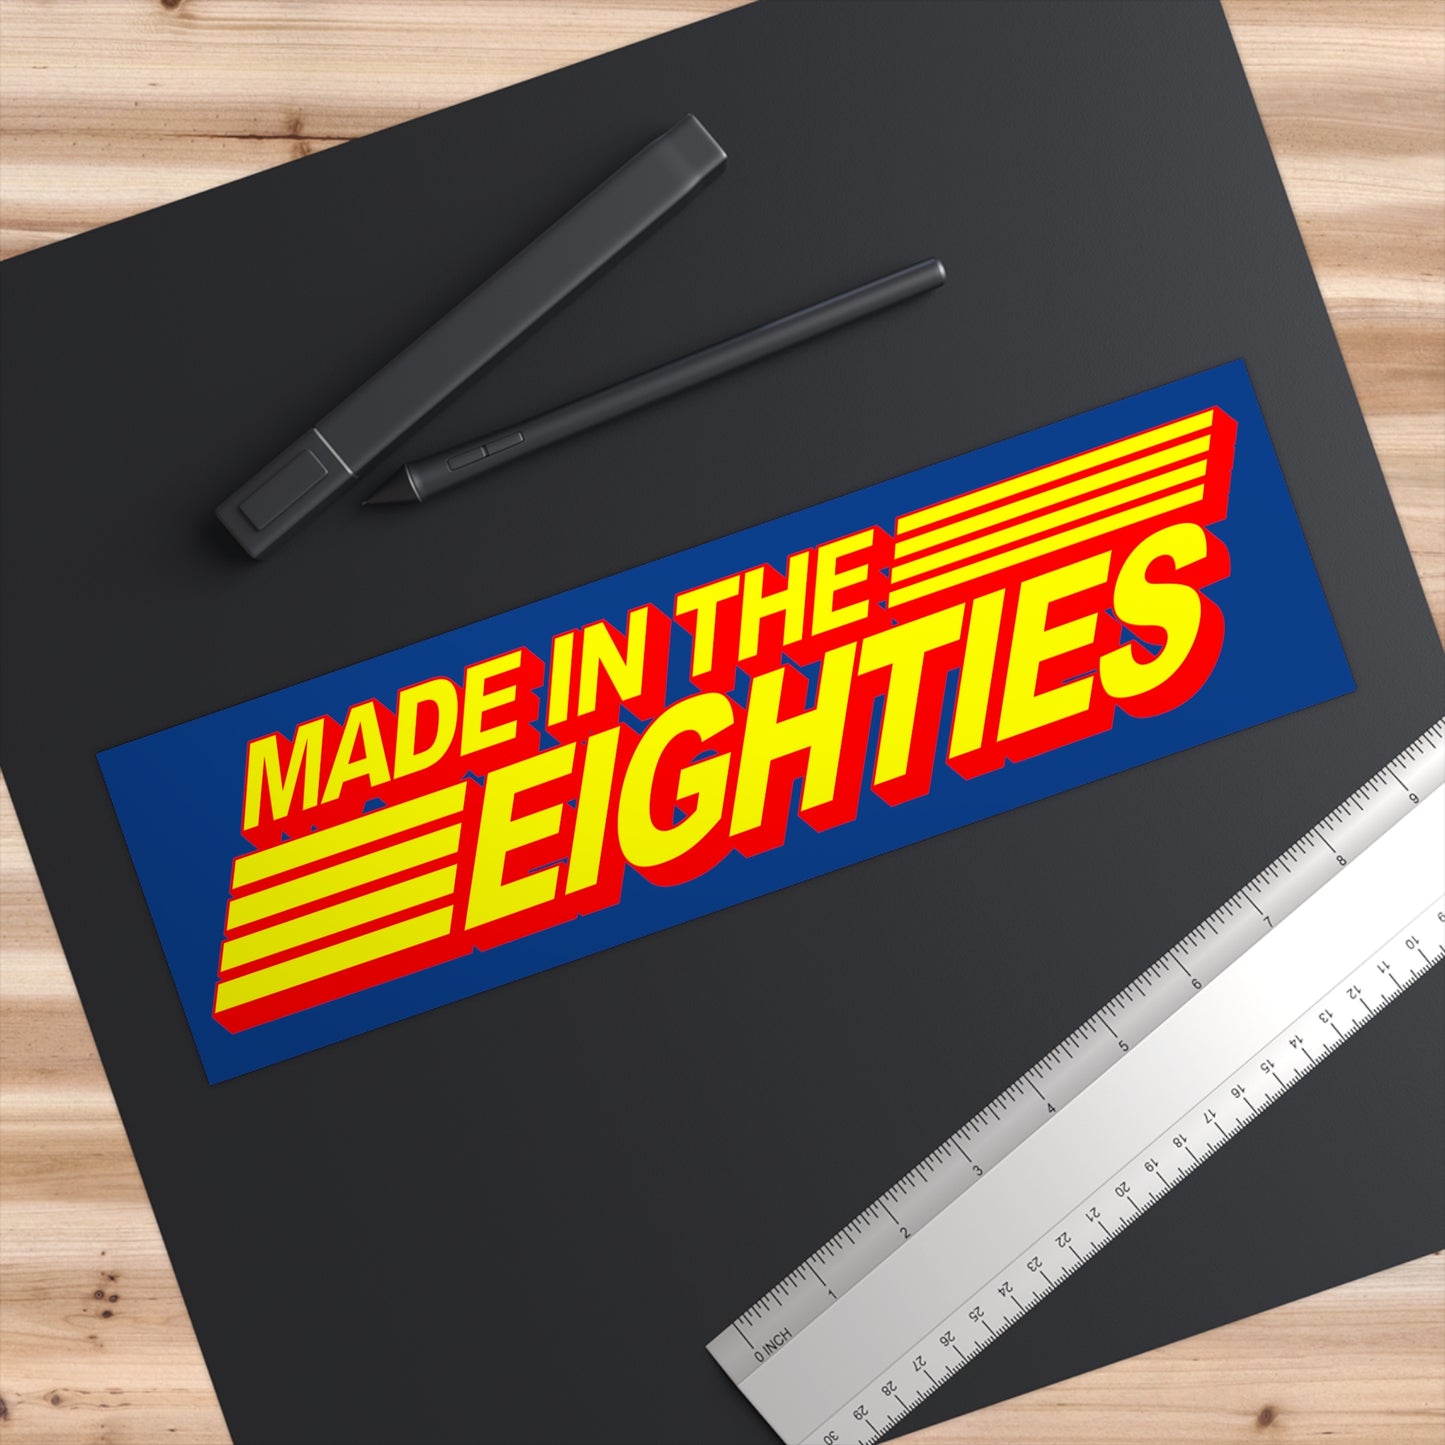 Made in the Eighties NP bumper sticker